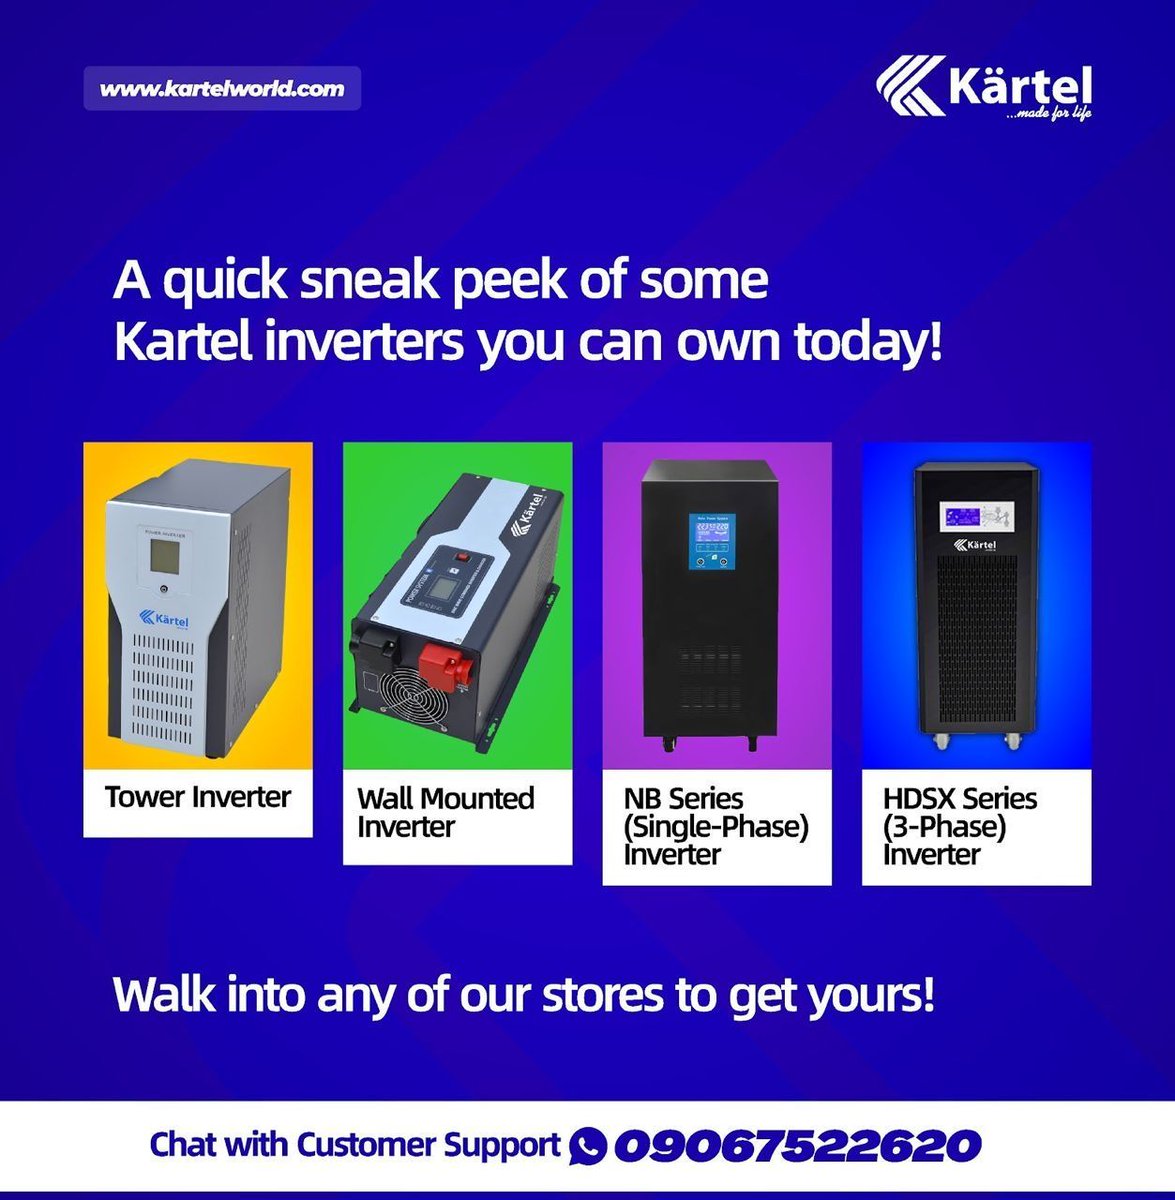 Get a glimpse of our latest Kartel inverters! With cutting-edge technology and superior performance, these inverters are ready to power your homes and businesses. Visit any of our stores today to get yours! #SolarPower #GreenEnergy #SolarInnovation #CleanTech #GoGreen